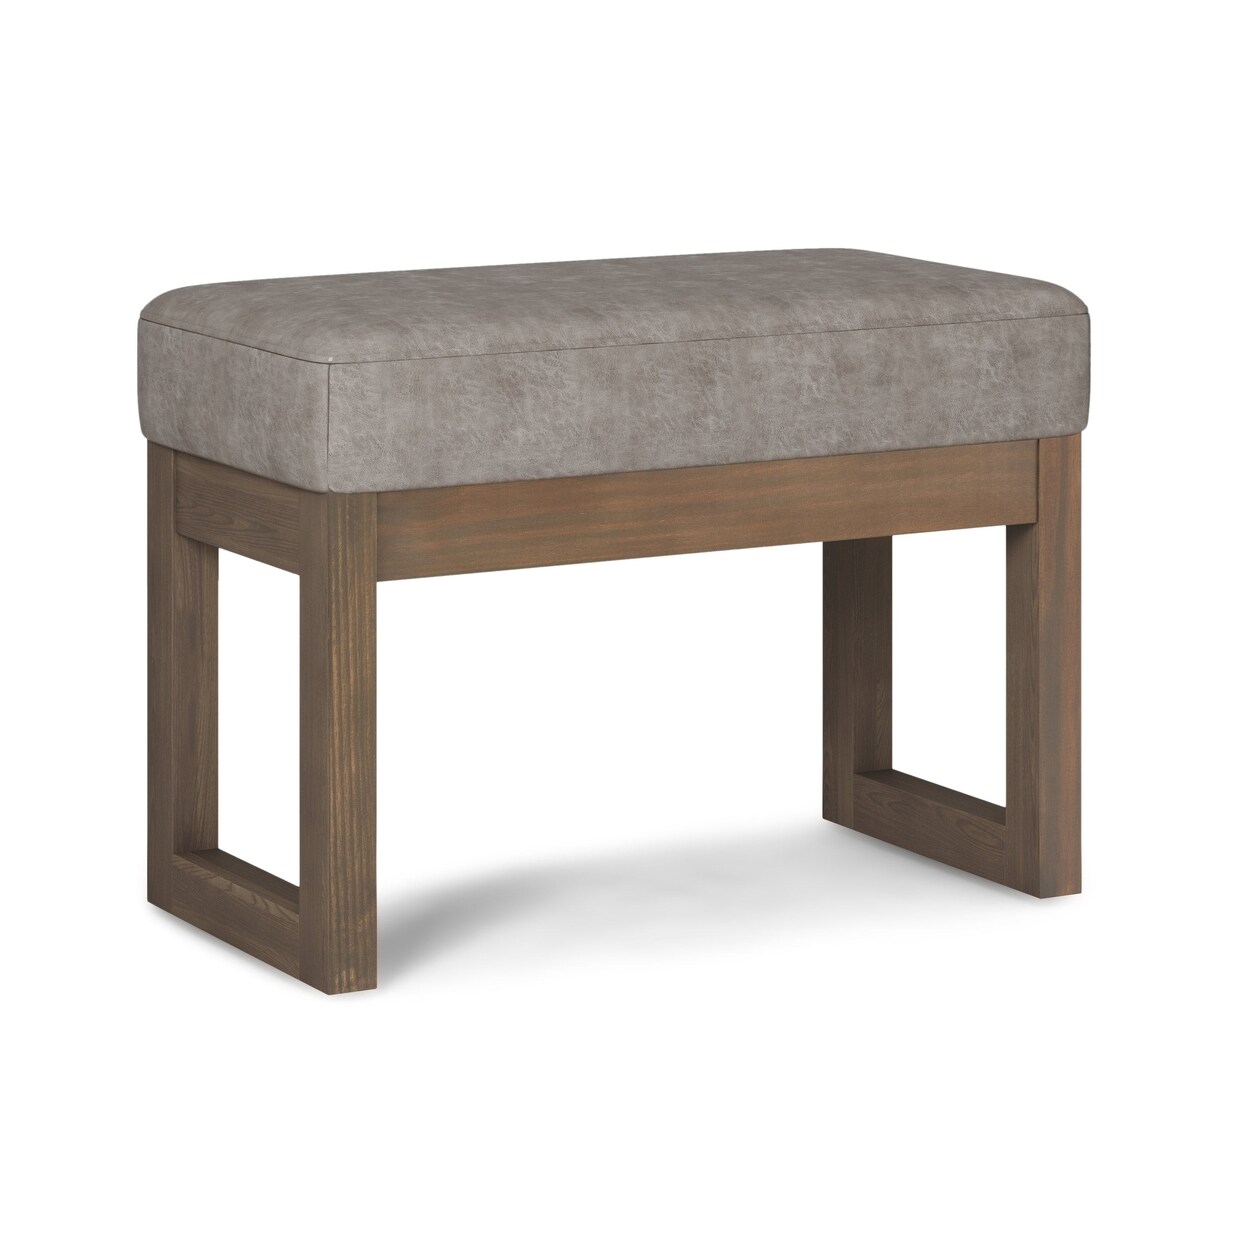 Simpli Home Milltown Small Ottoman Bench in Distressed Vegan Leather